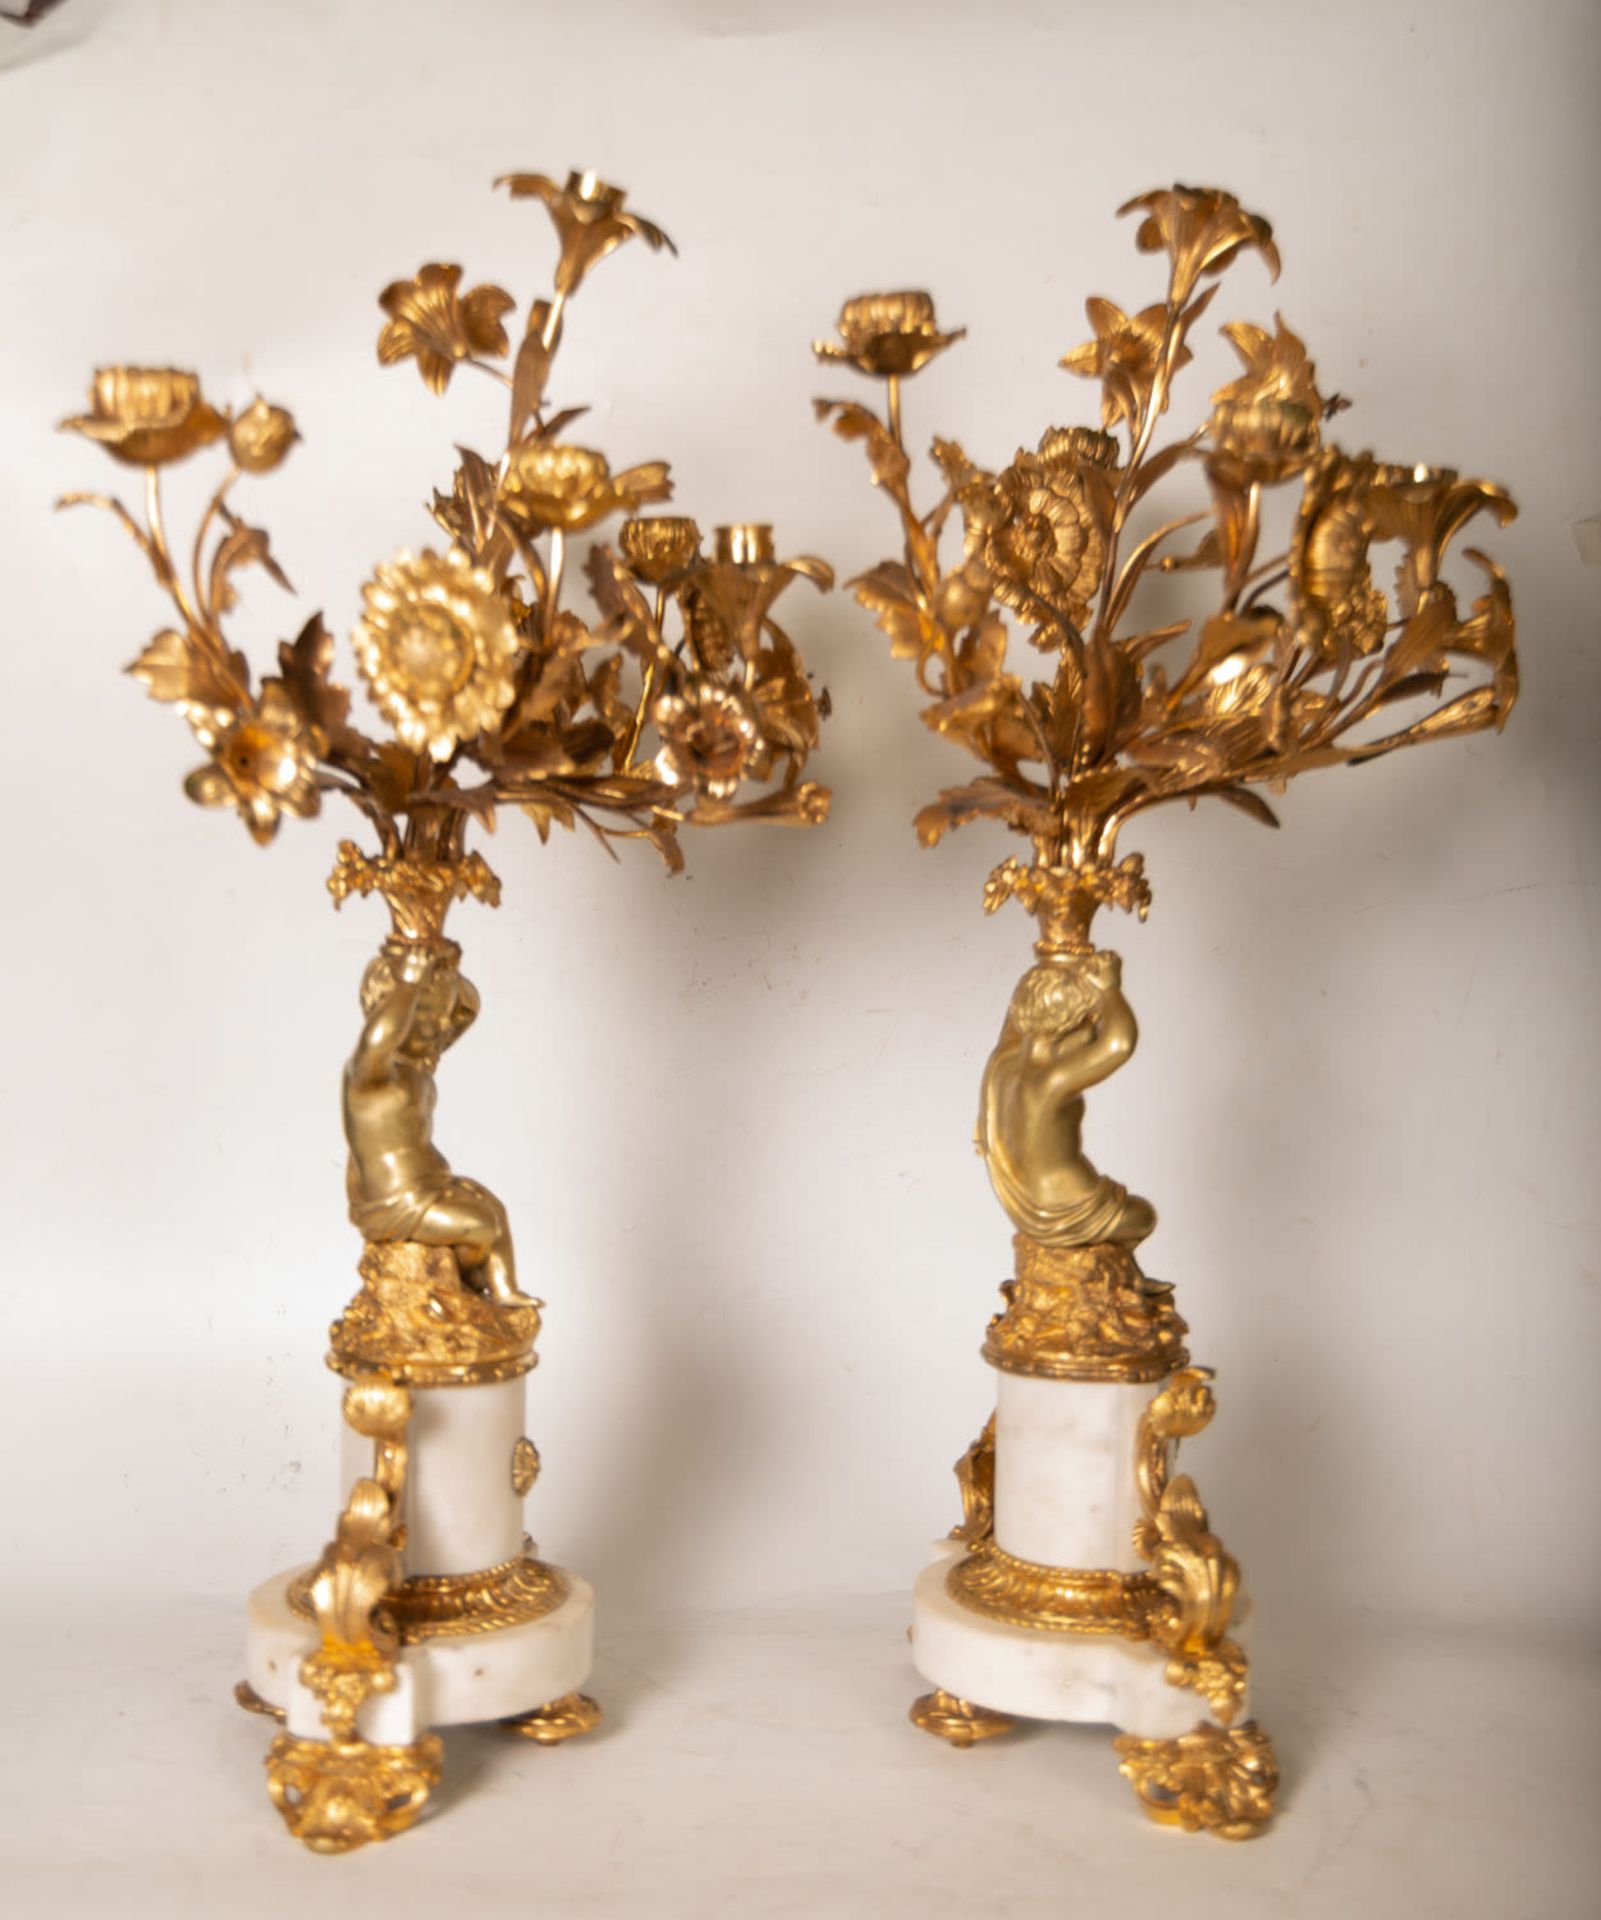 Large three-piece Garniture clock with pair of cherub candlesticks in Marble and gilt bronze, France - Image 2 of 11